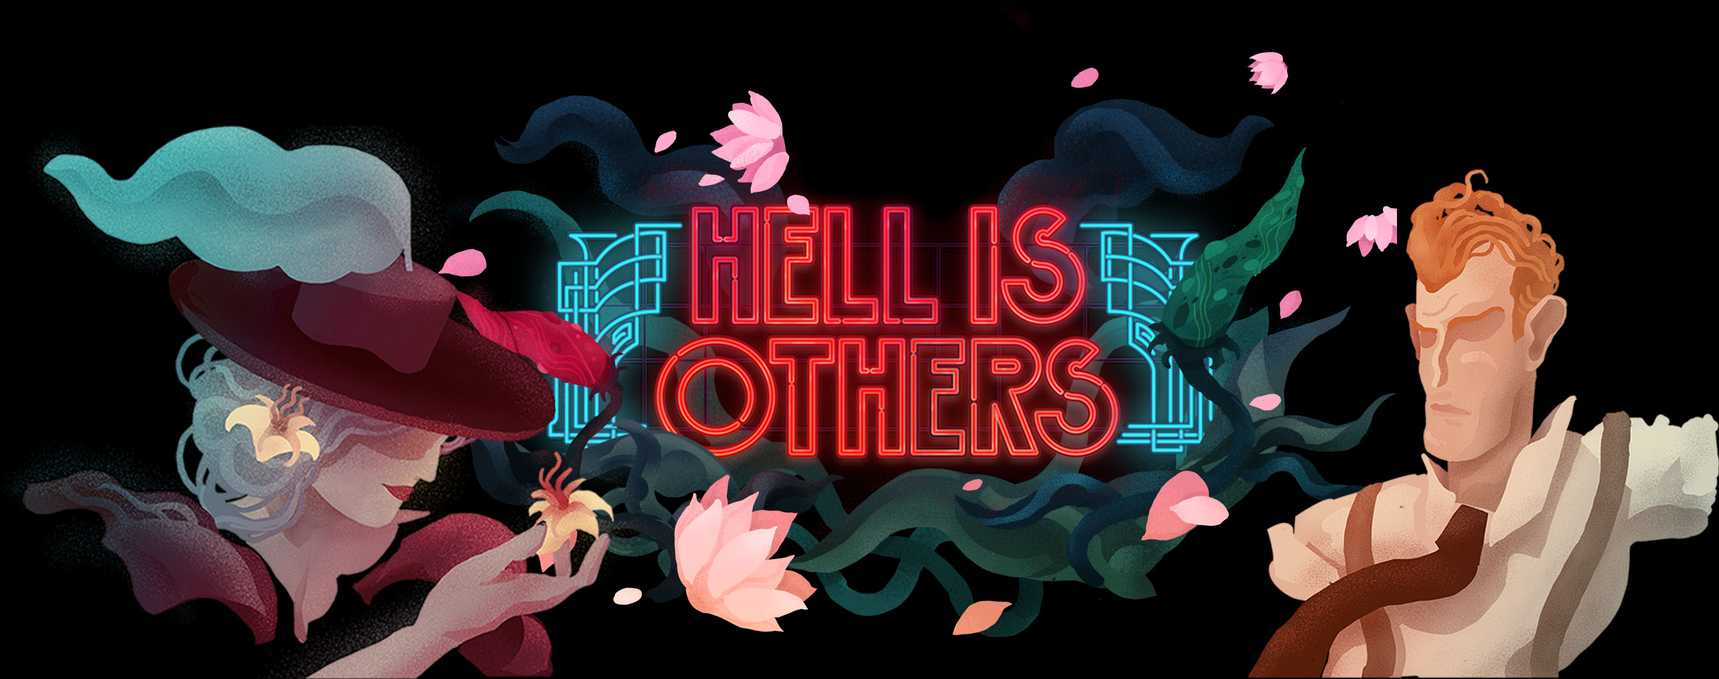 Hell is Others logo